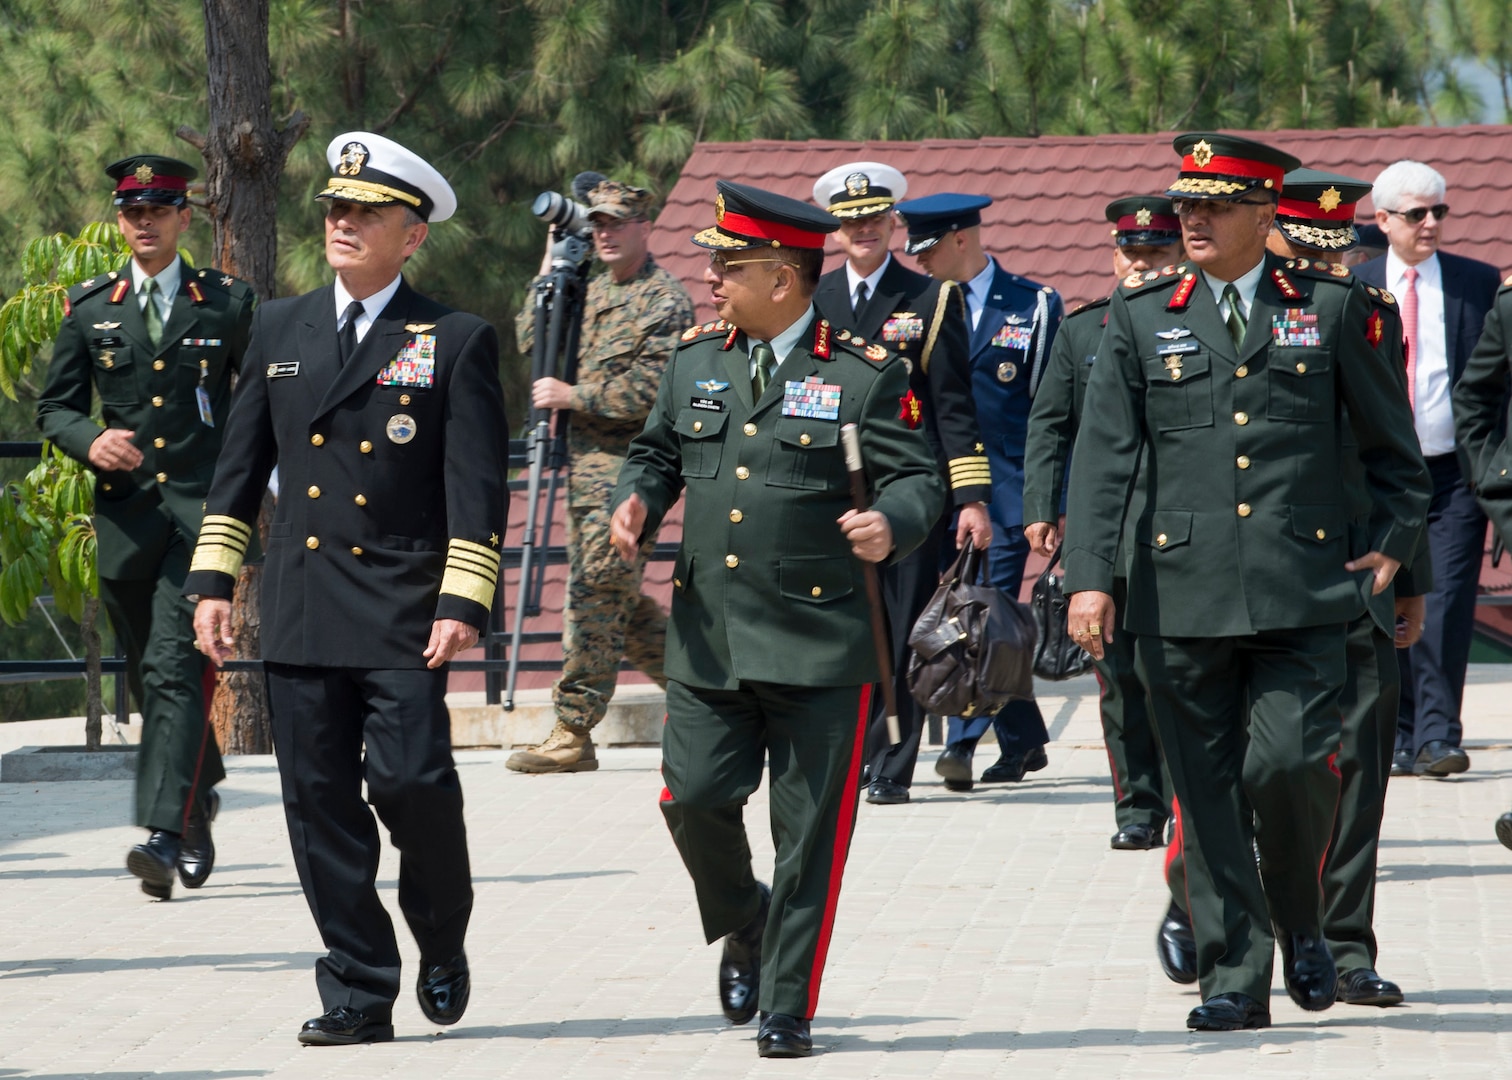 U.S. Pacific Command commander Admiral Harry Harris meets with Chief of Nepalese Army Staff General Rajendra Chhetri after landing at the Birendra Peace Operations Training Centre (BPOTC) in Nepal for the opening ceremony of Shanti Prayas III. Shanti Prayas III is a multinational United Nations peacekeeping exercise designed to provide pre-deployment training to U.N. partner countries in preparation for real-world peacekeeping operations. (U.S. Navy Photo by Petty Officer 2nd Class Taylor Mohr)